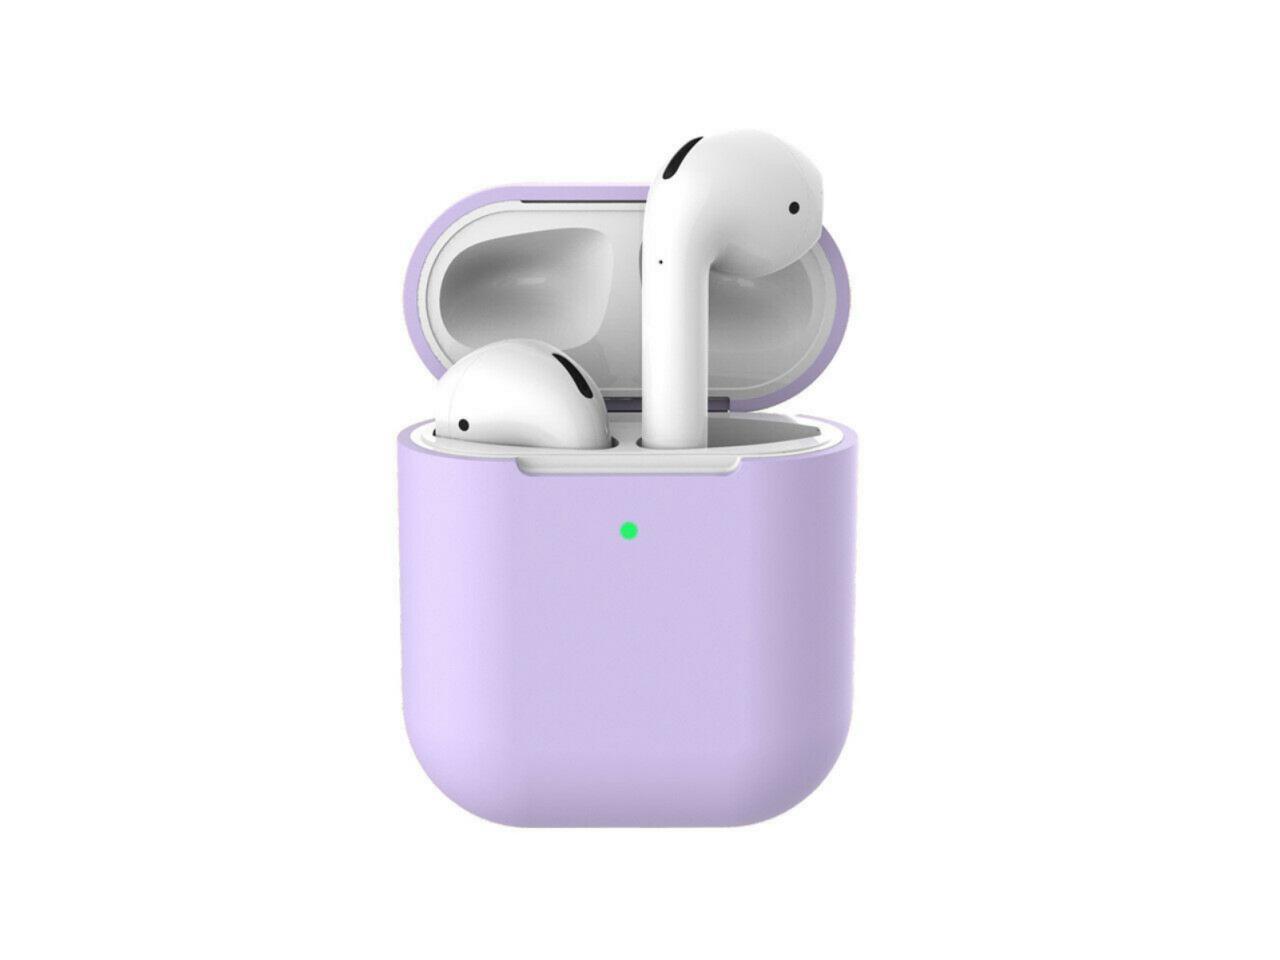 Silicone Headset/Earpiece Case Protective Cover For AirPods 2nd Generation Earphone (Only Cover, Not included earphone)